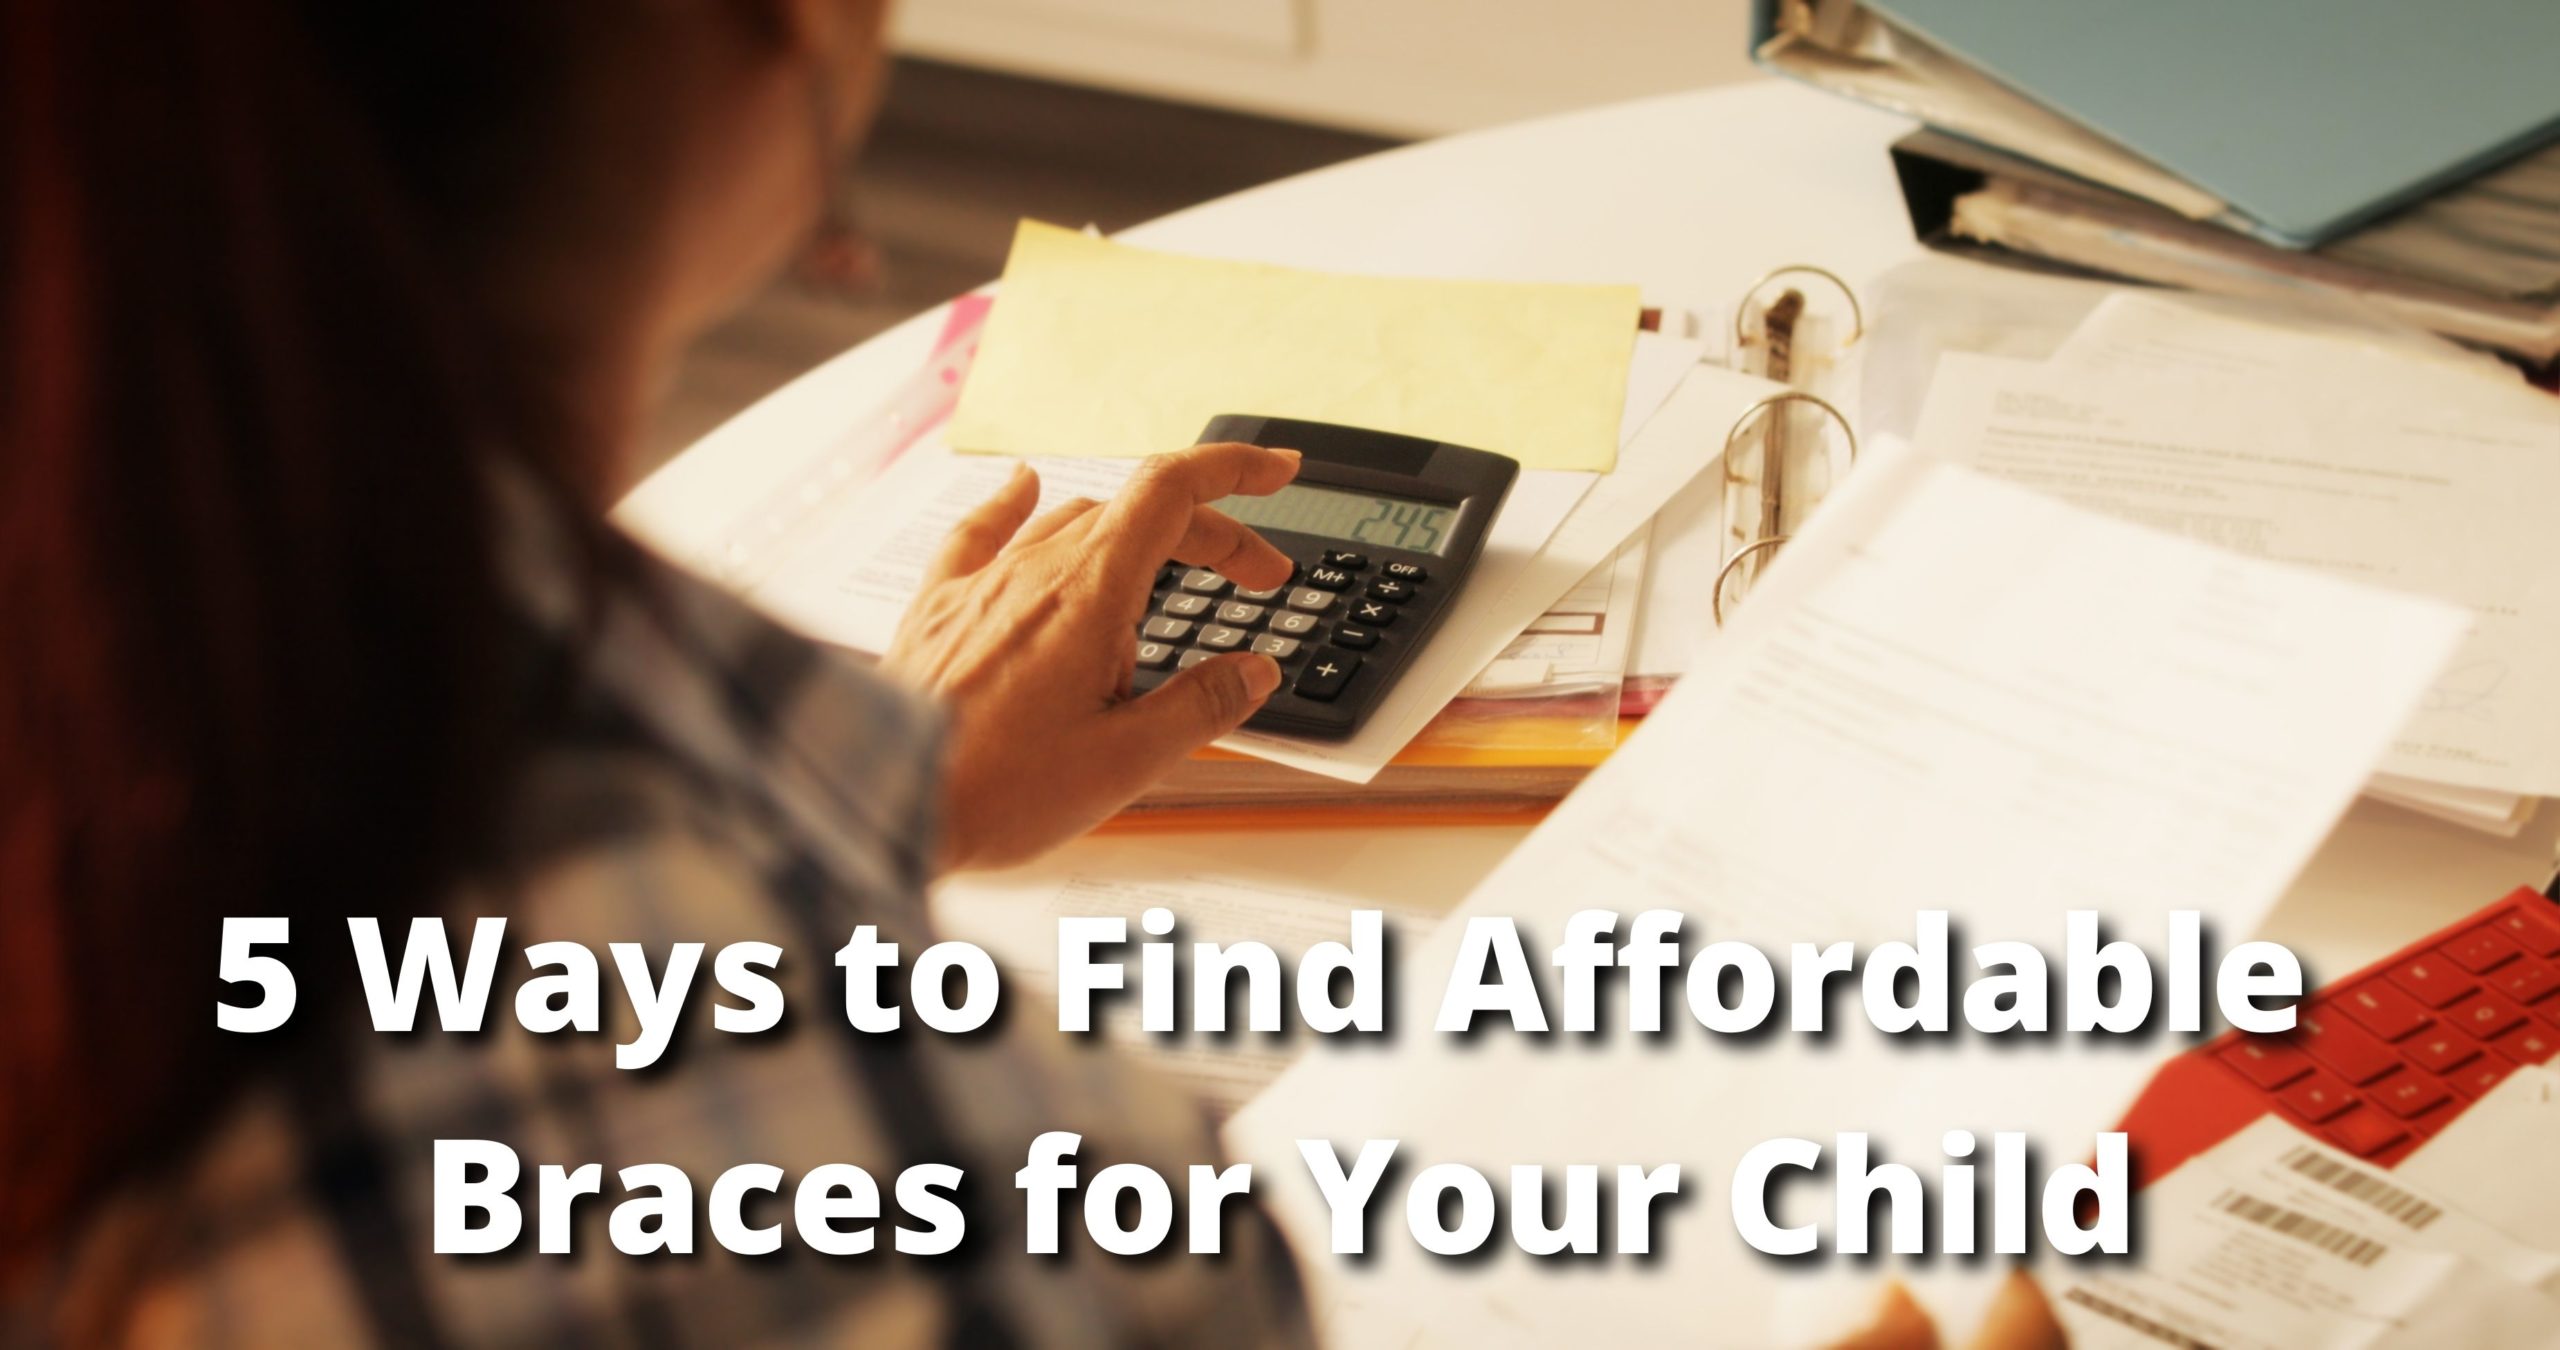 5 Ways to Find Affordable Braces for Your Child